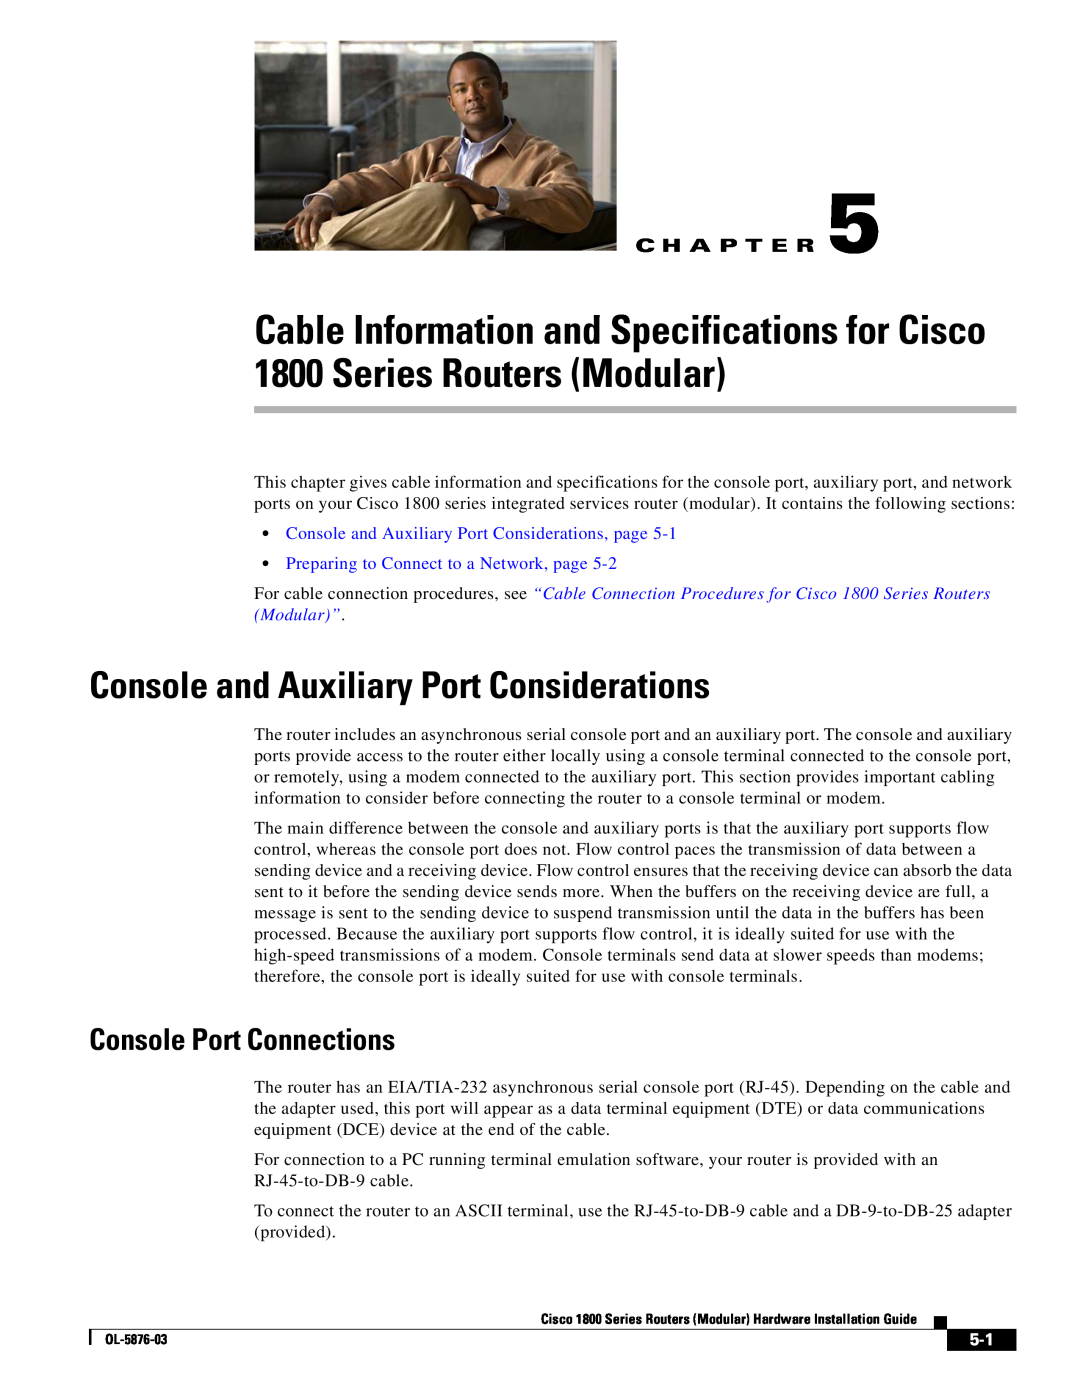 Cisco Systems CISCO1841-HSEC/K9-RF Console and Auxiliary Port Considerations, Console Port Connections, C H A P T E R 